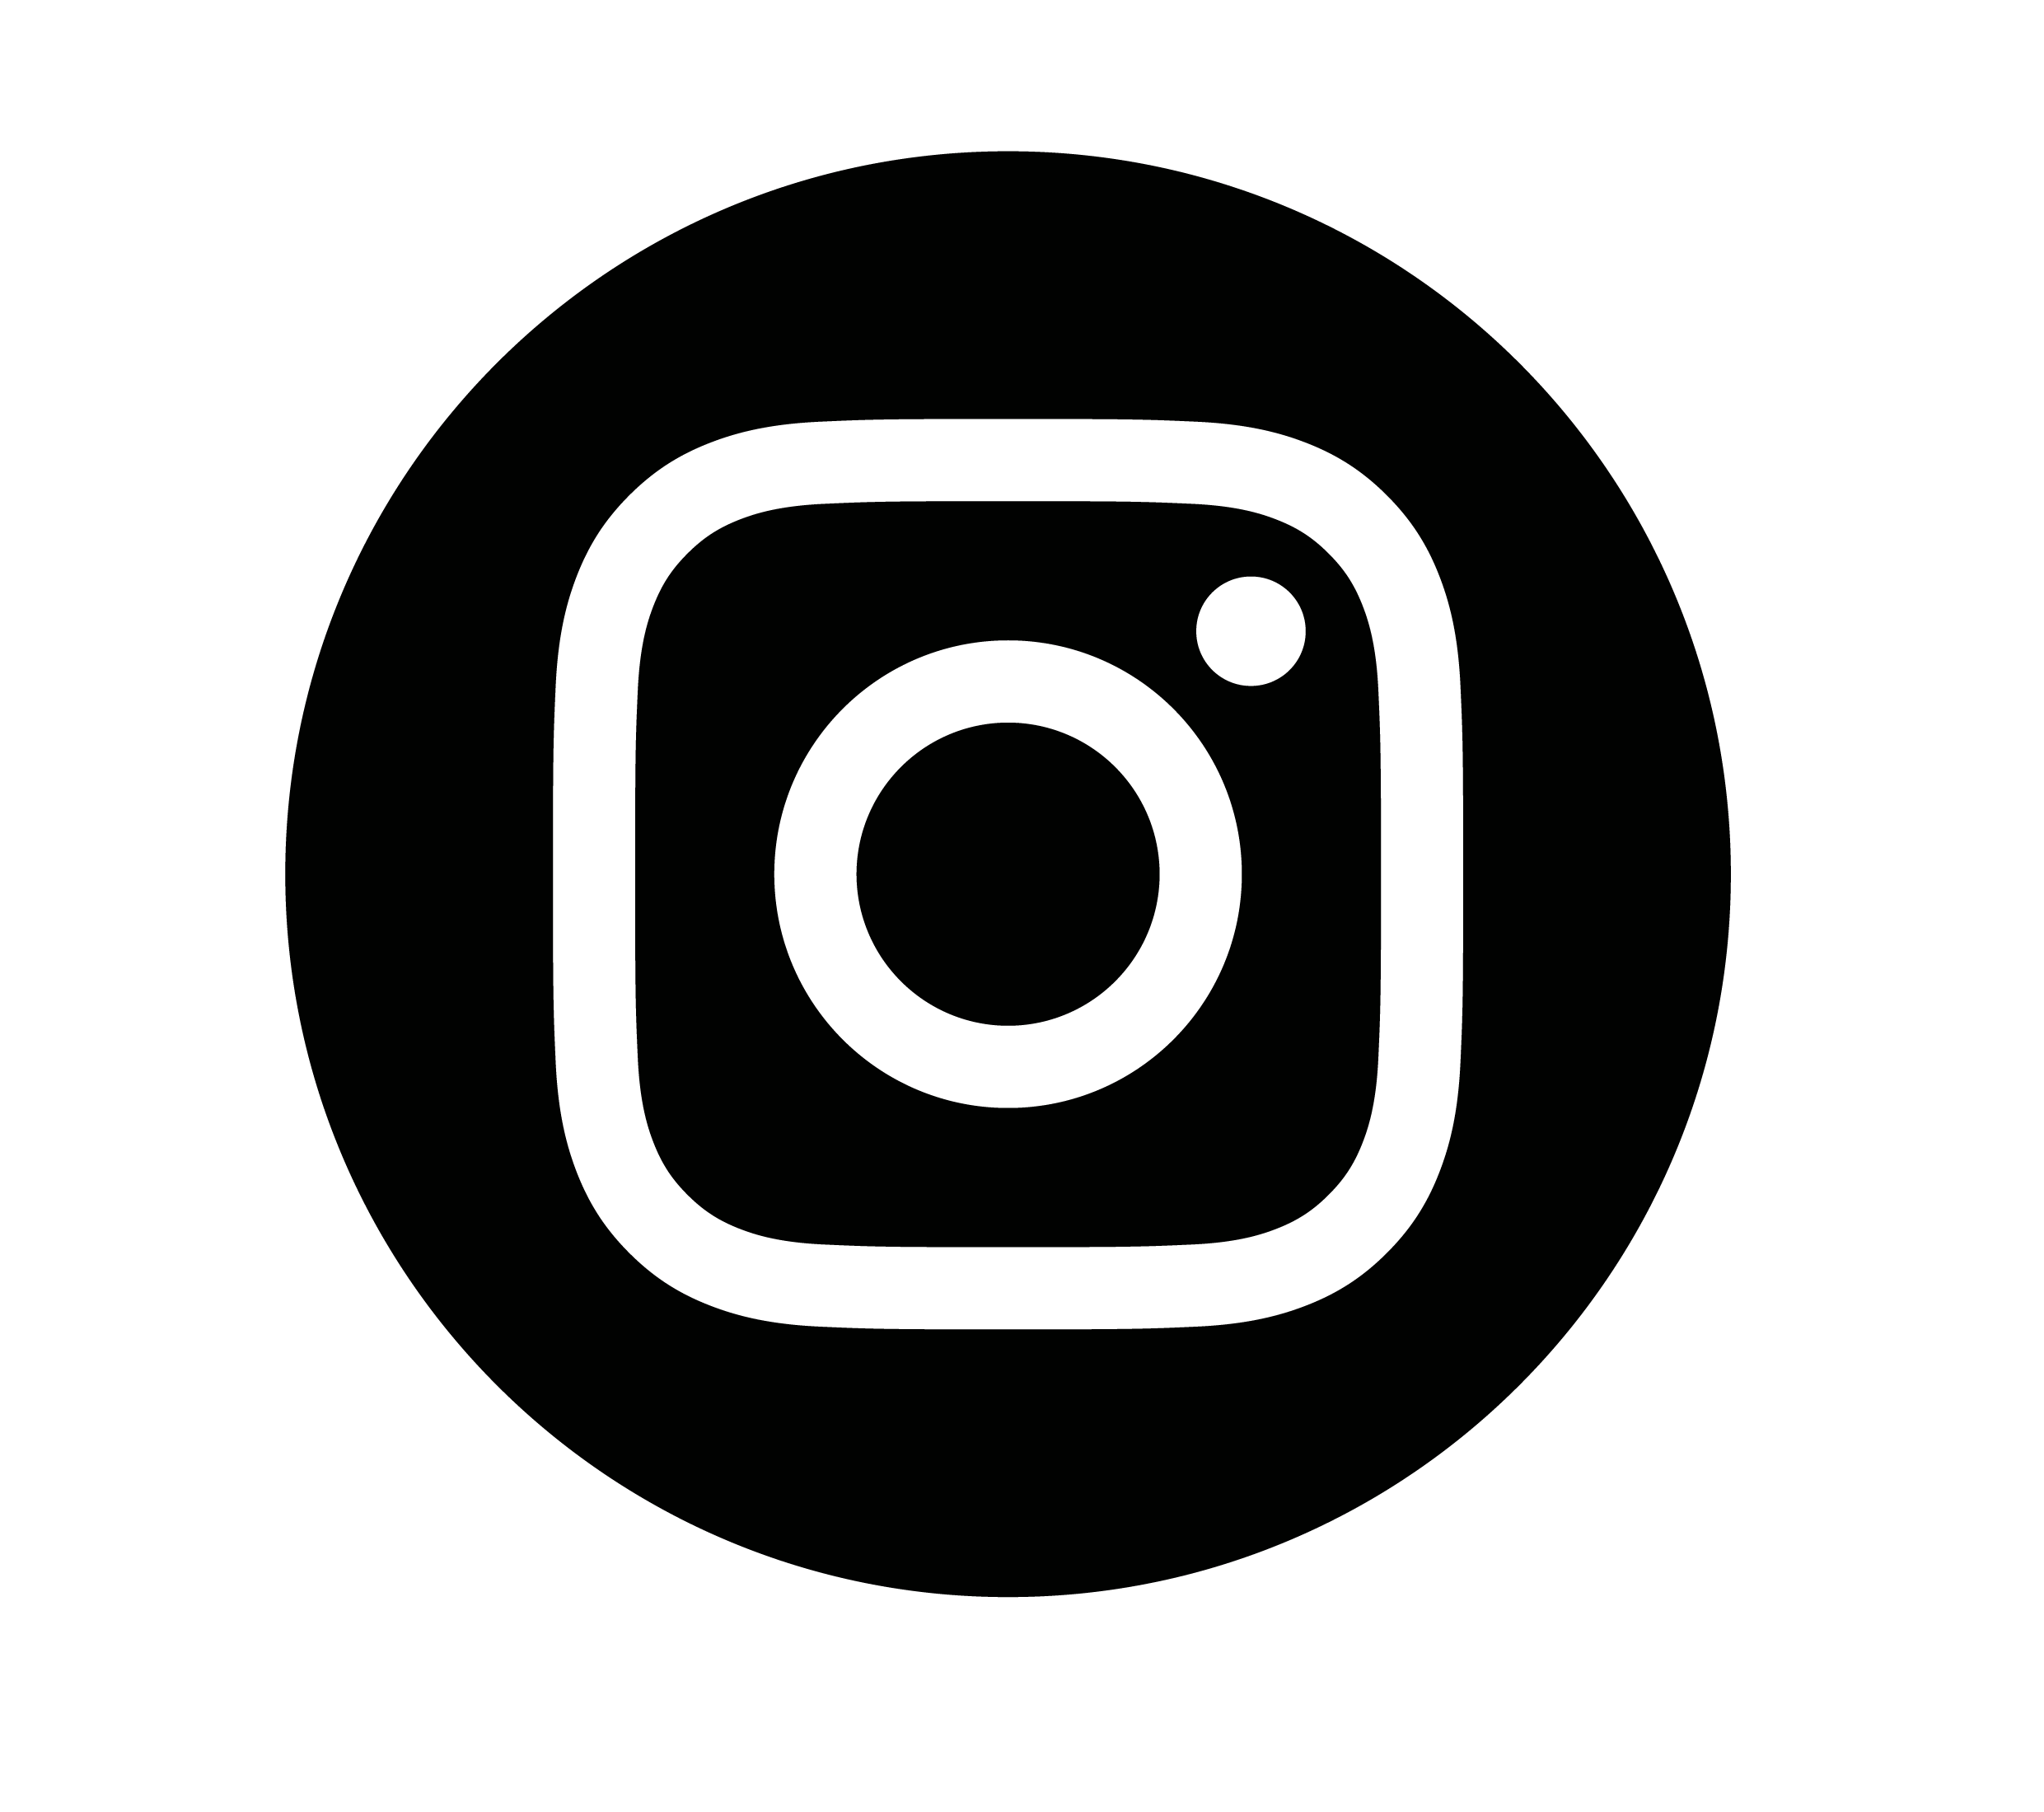 icono-instagram-01-1.png